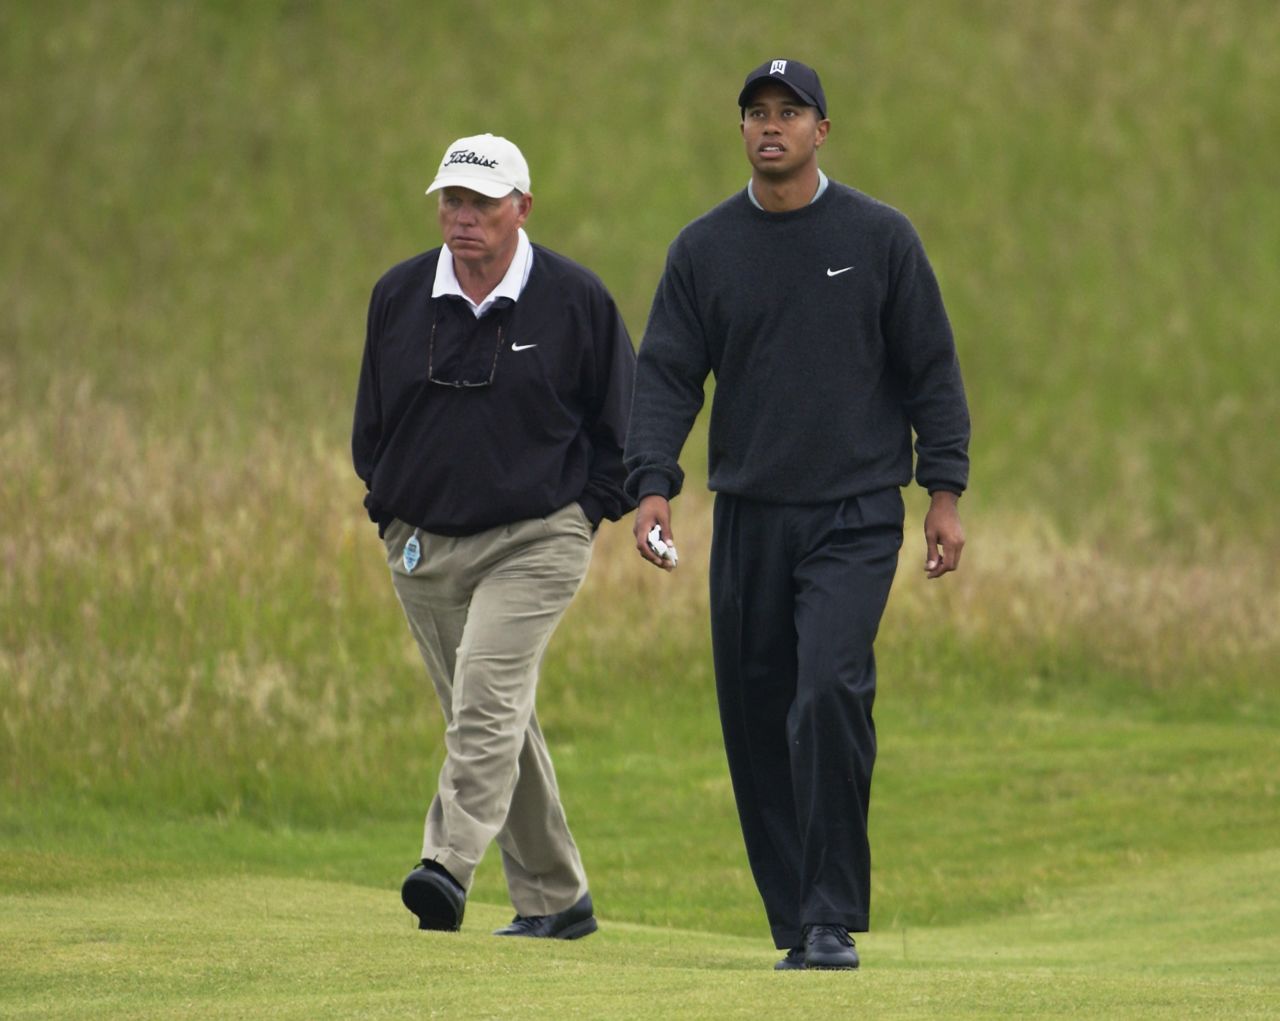 Butch Harmon walks the course with Woods at the British Open in 2002. Harmon turned professional in 1965 and won one event on the PGA Tour before becoming a coach, helping Tiger to the first eight of his 14 major wins.